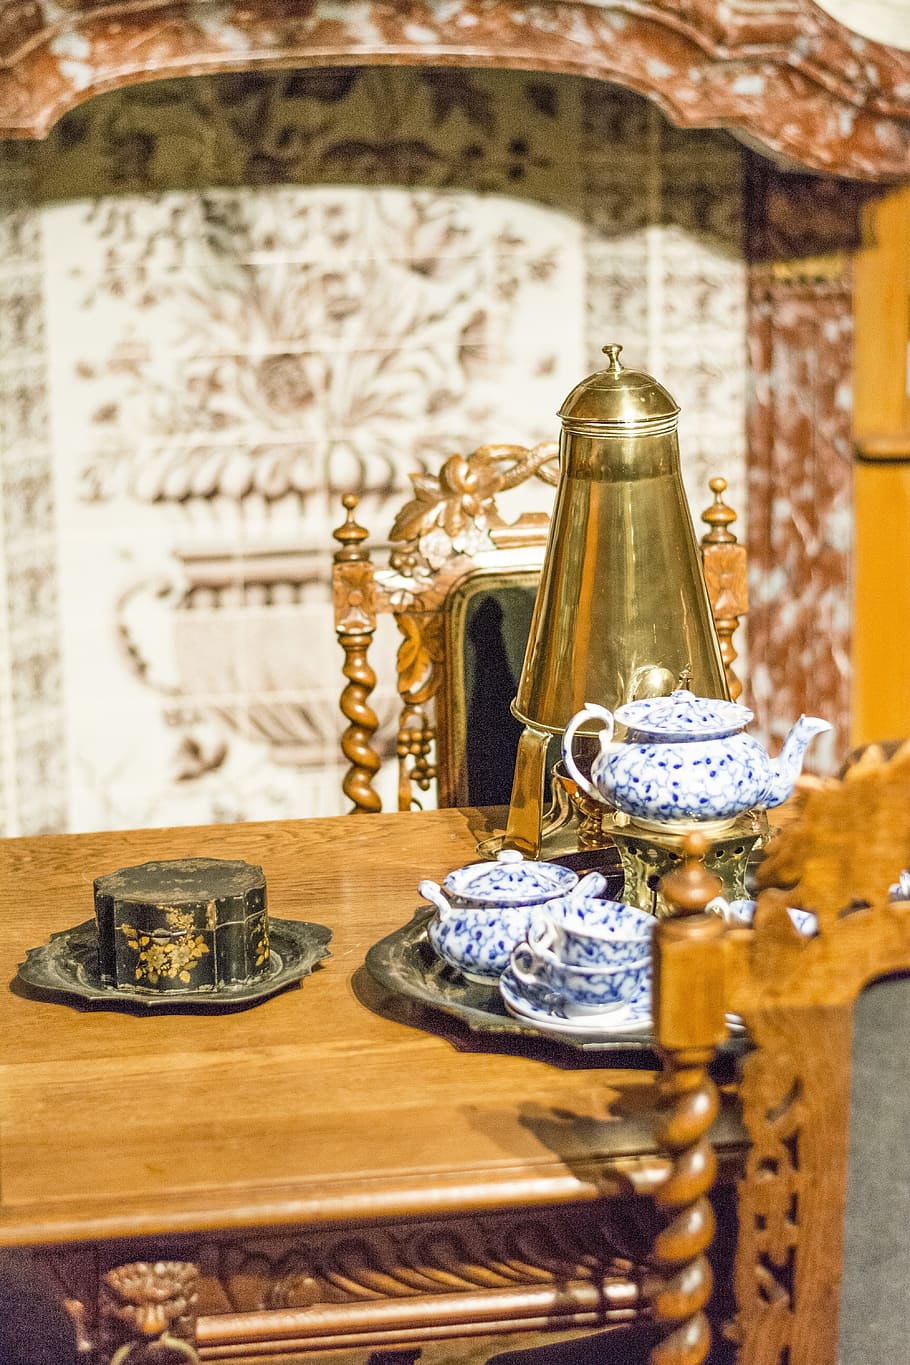 museum, old, history, netherlands, kitchen, wealth, cups, fireplace, tea pot, coffeepot